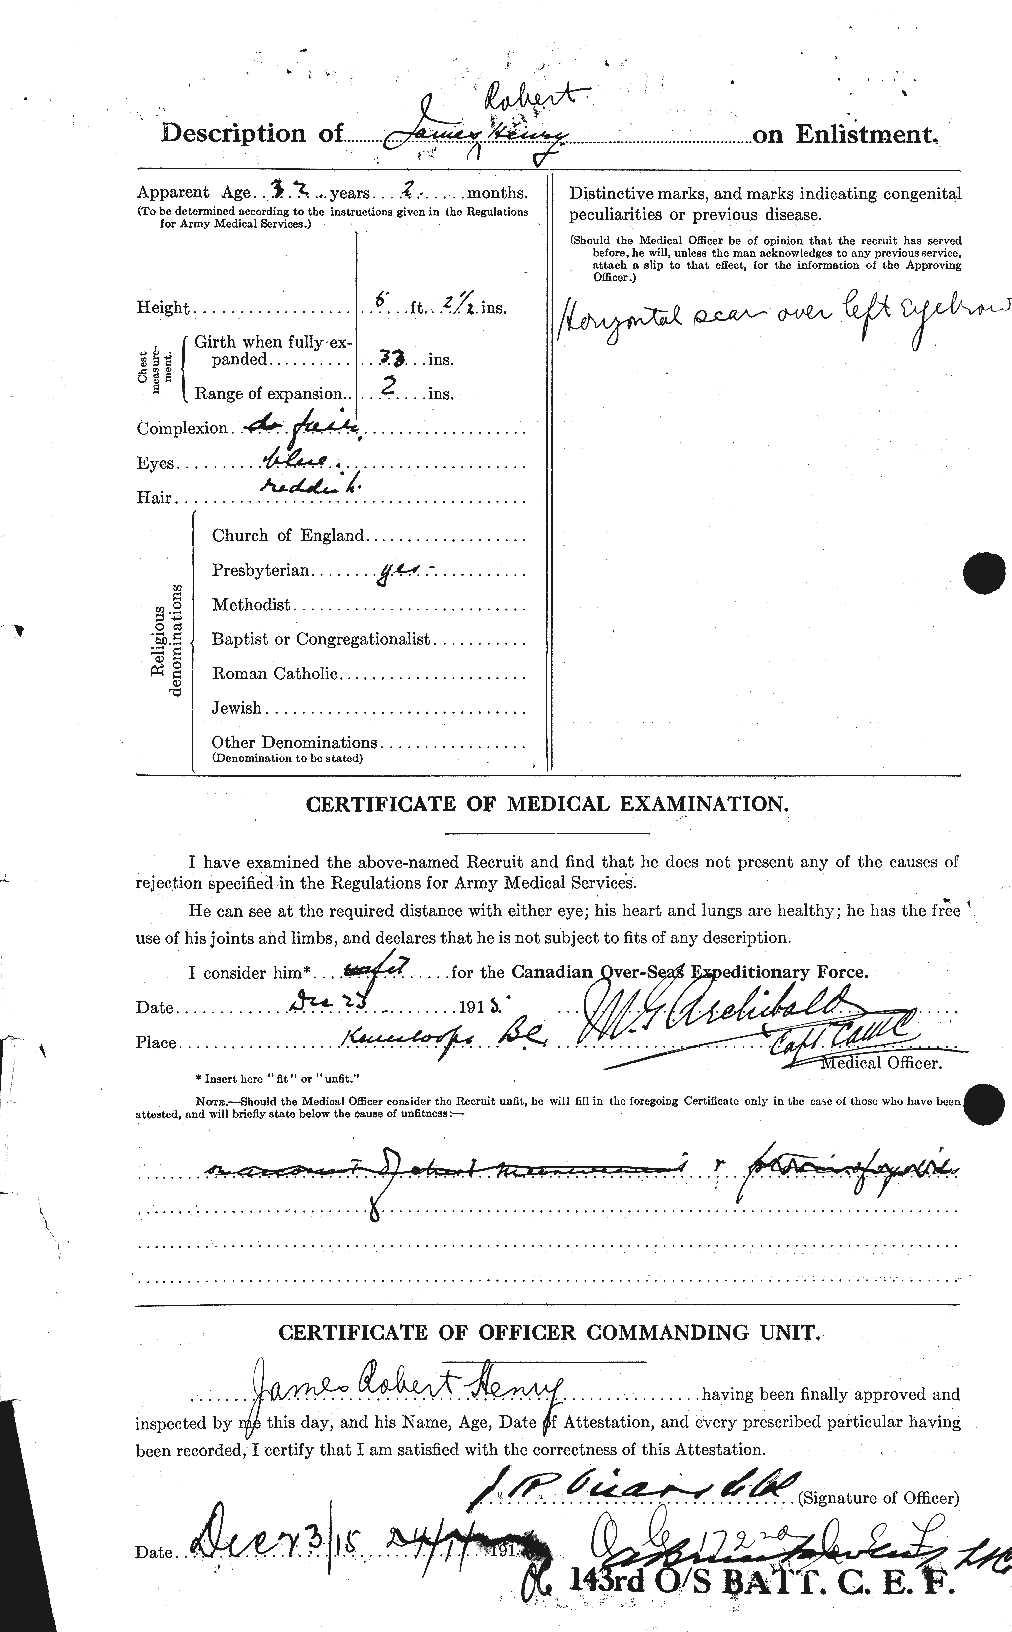 Personnel Records of the First World War - CEF 387599b